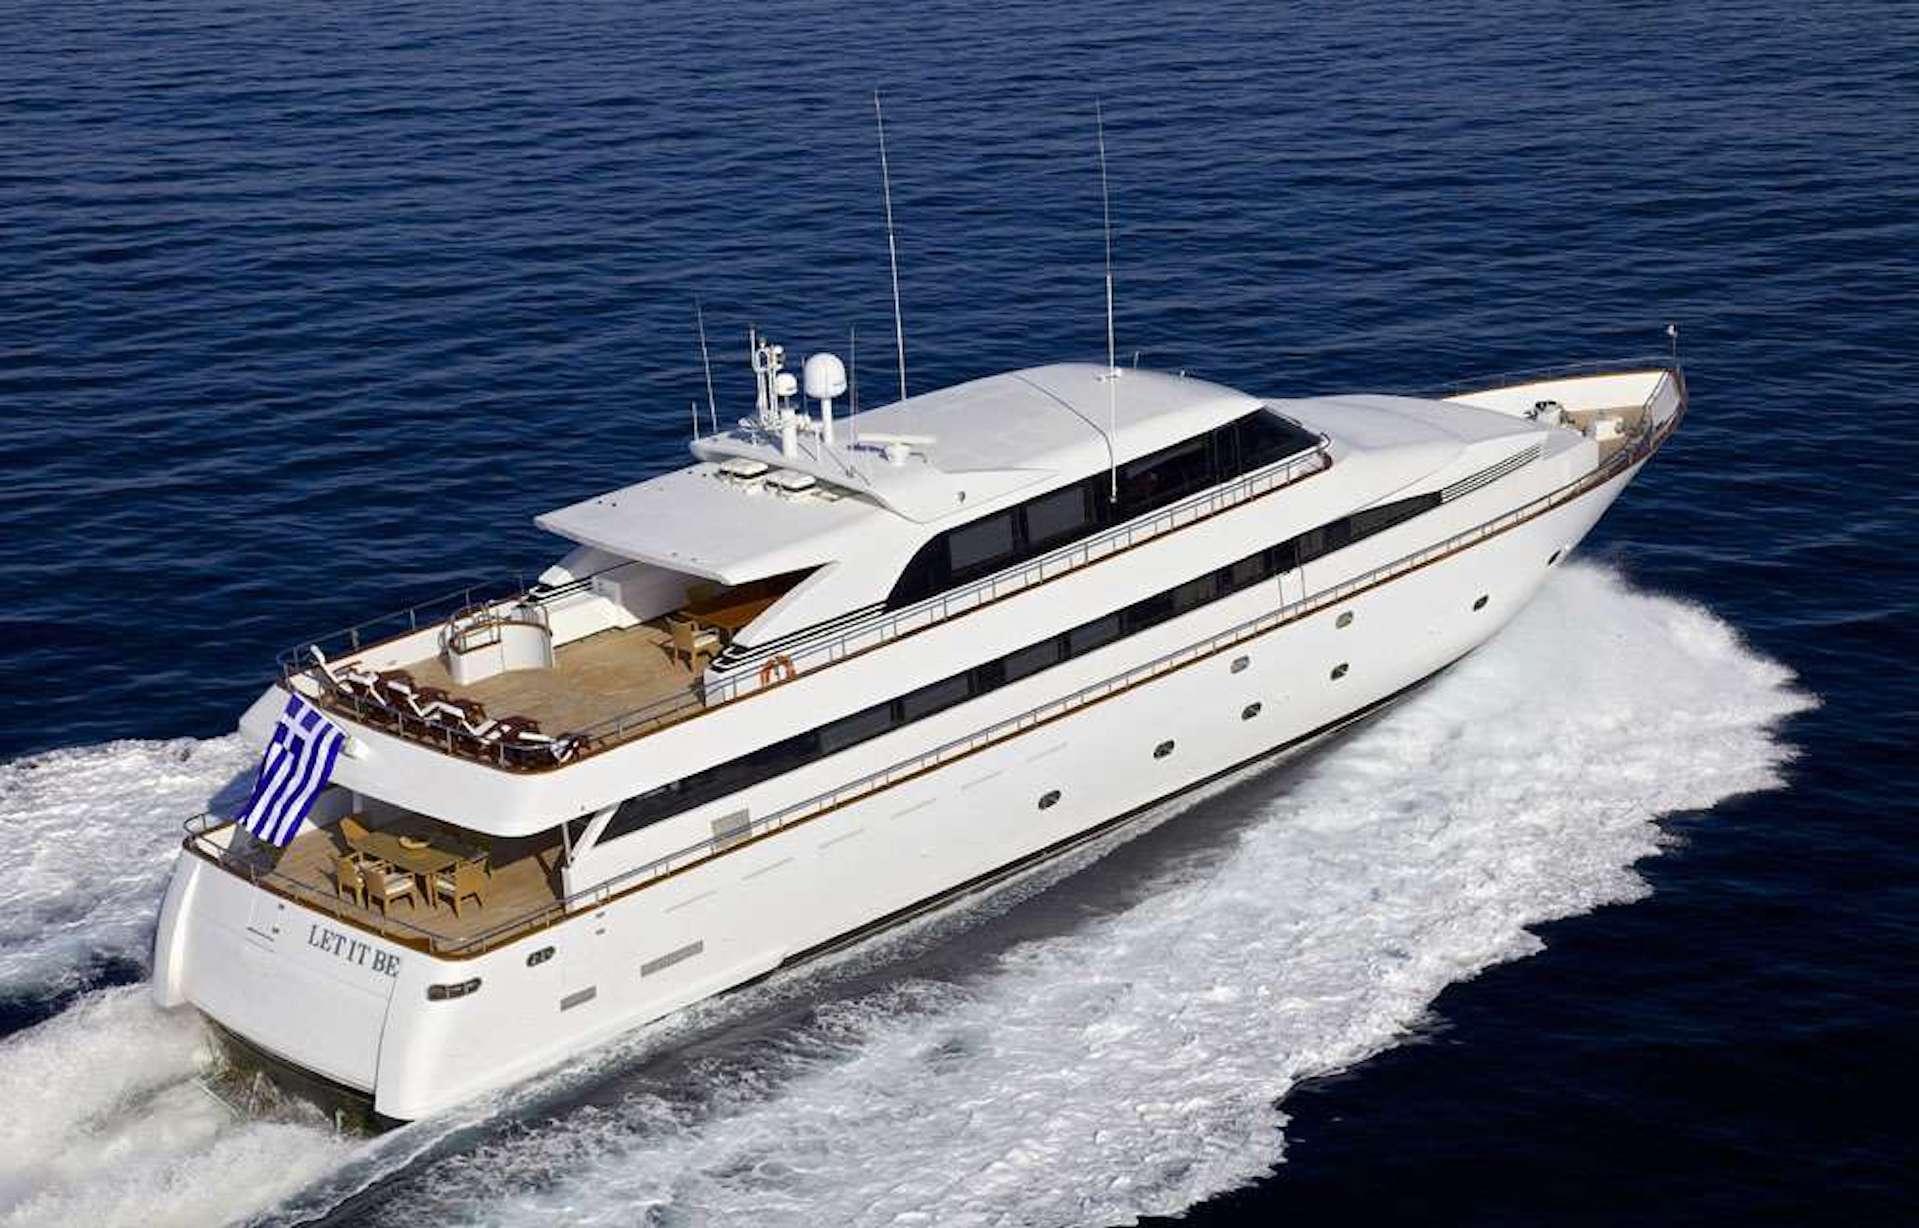 Athens Gold Yachting - Let It Be